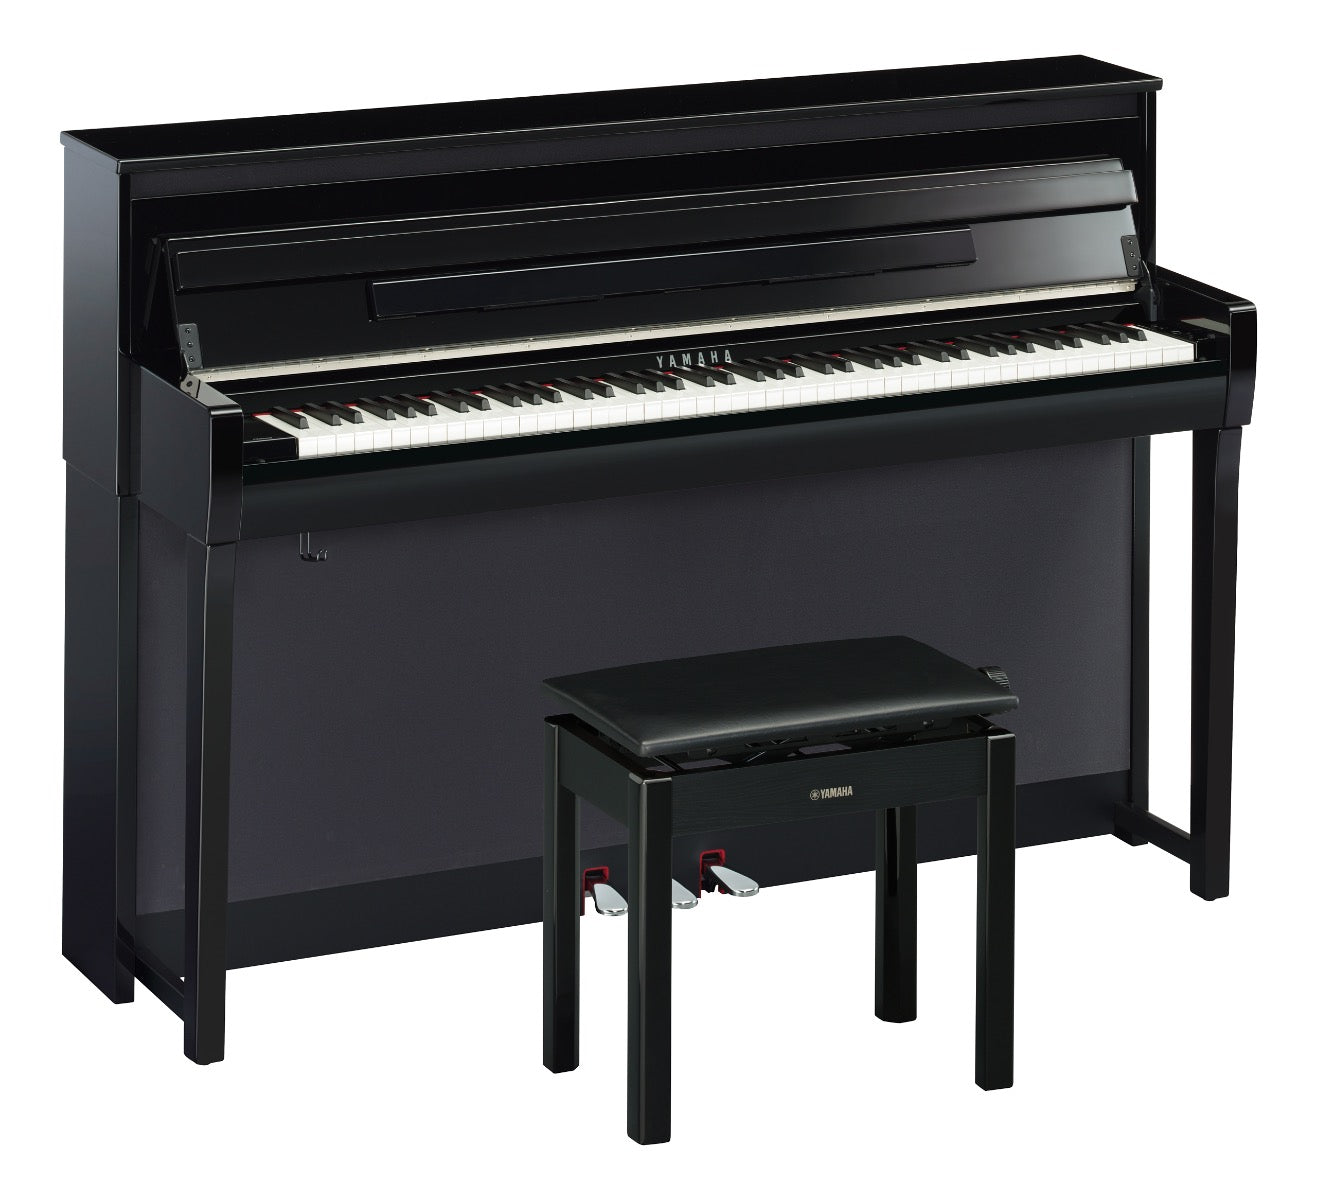 3/4 view of Yamaha Clavinova CLP-785 Digital Piano - Polished Ebony with bench showing front, top and left side